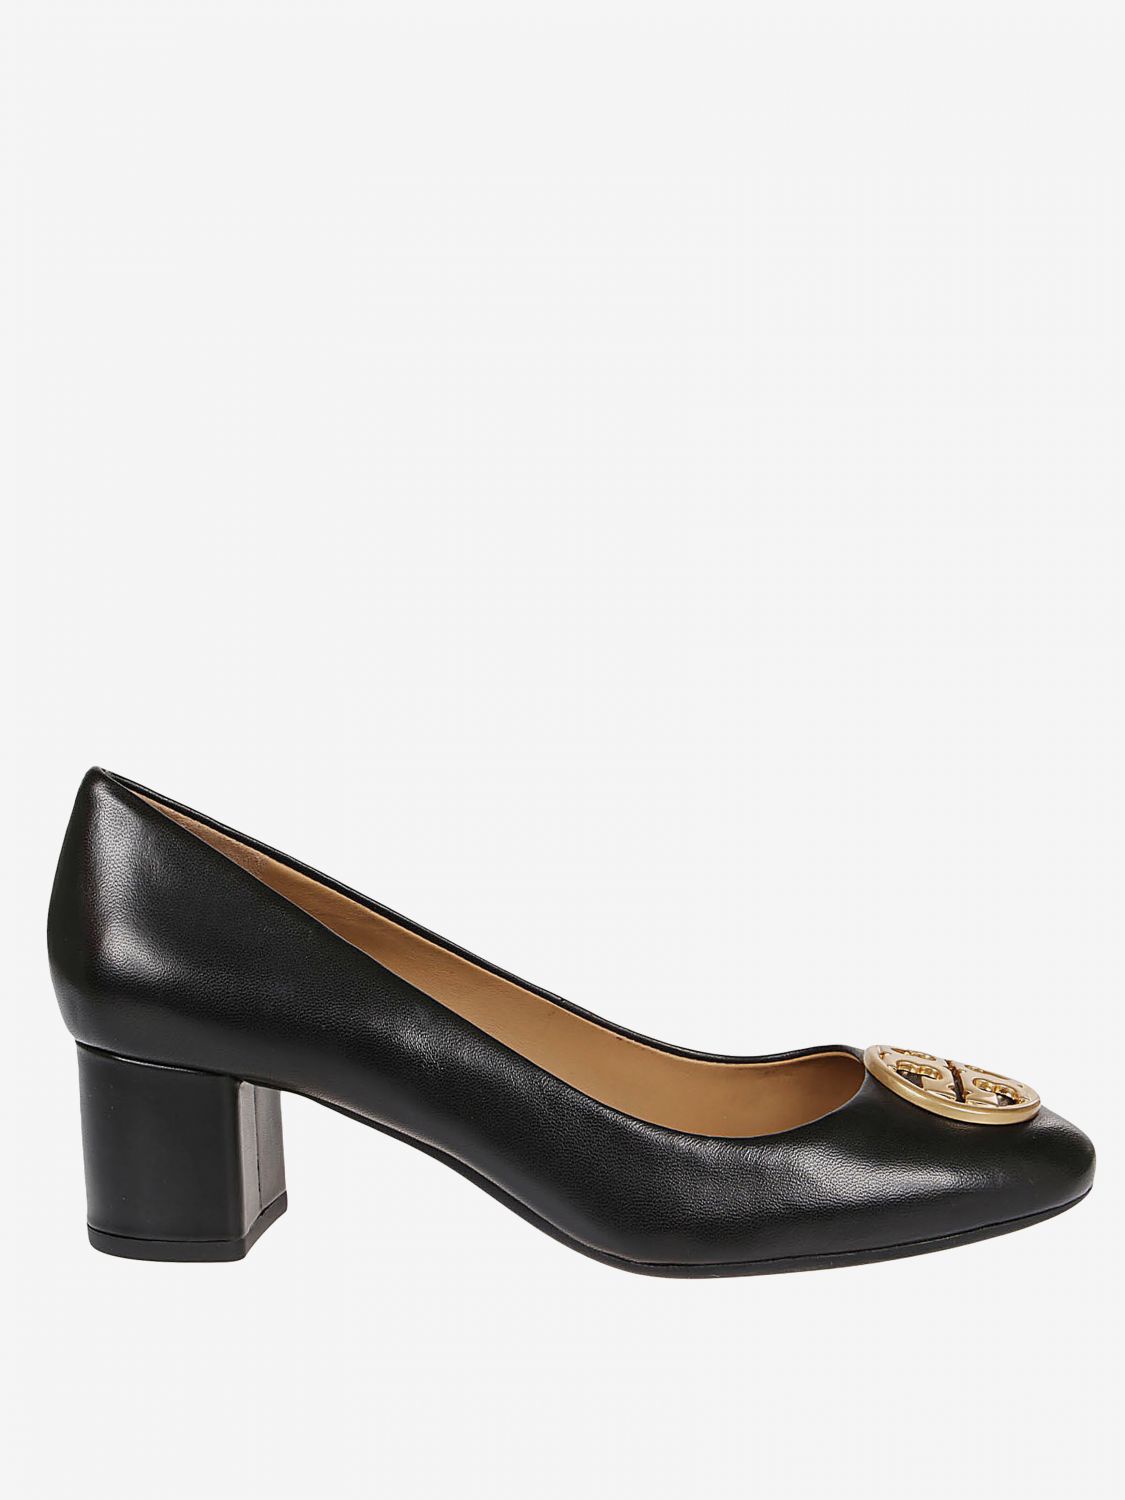 Tory Burch Outlet: pumps for woman - Black | Tory Burch pumps 45900 online  on 